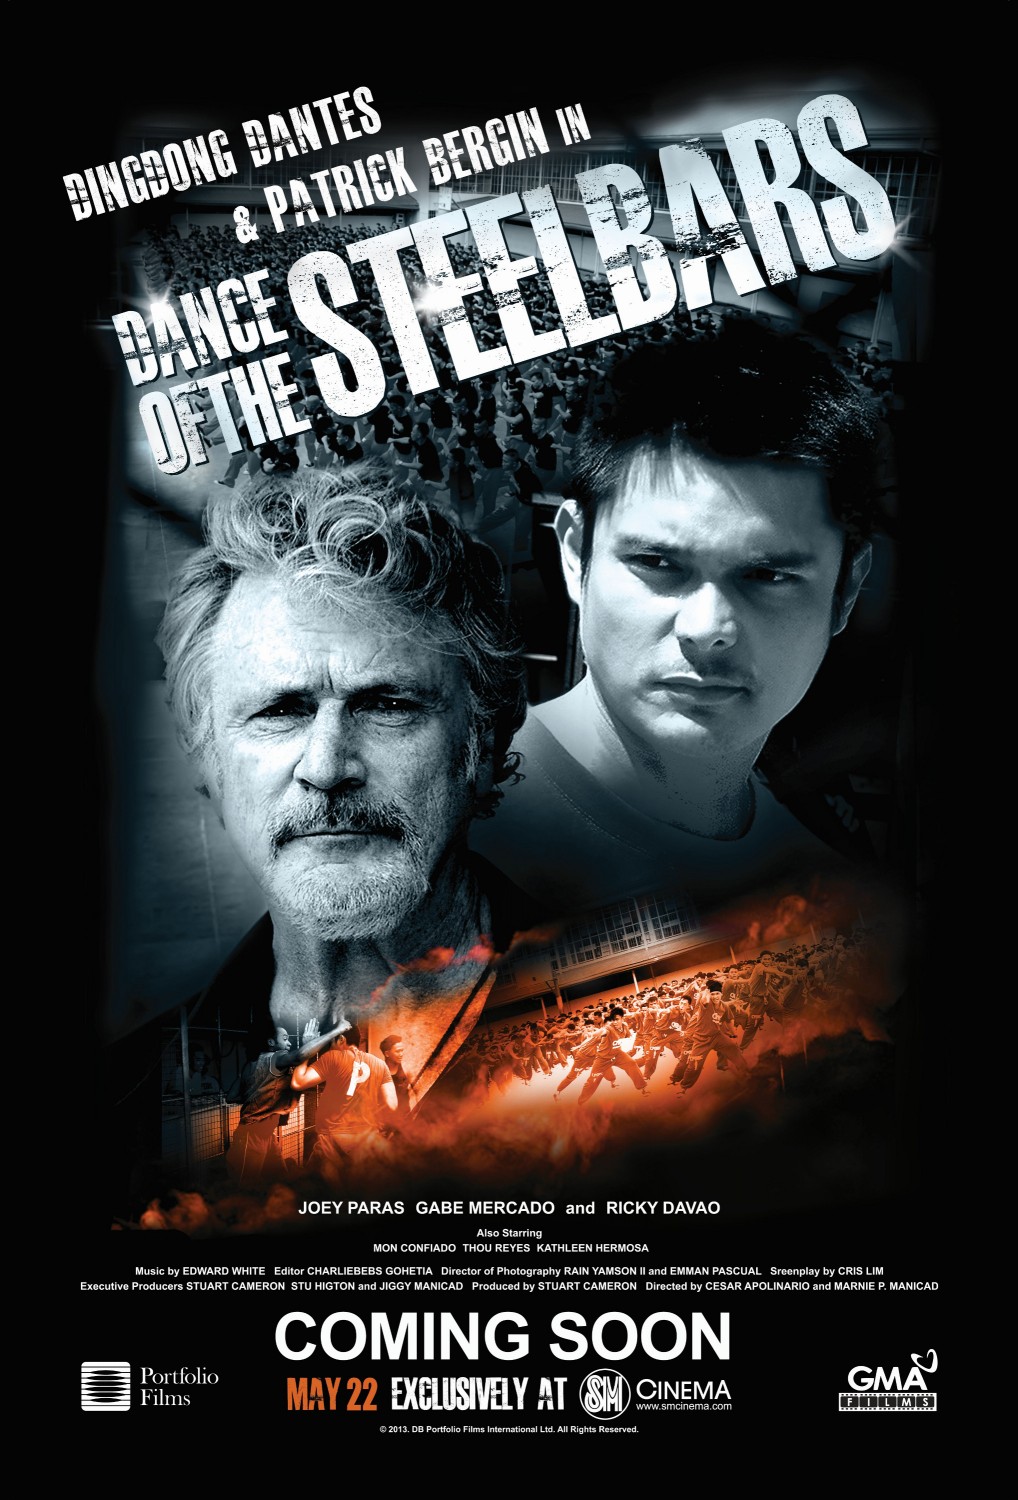 Extra Large Movie Poster Image for Dance of the Steel Bars 